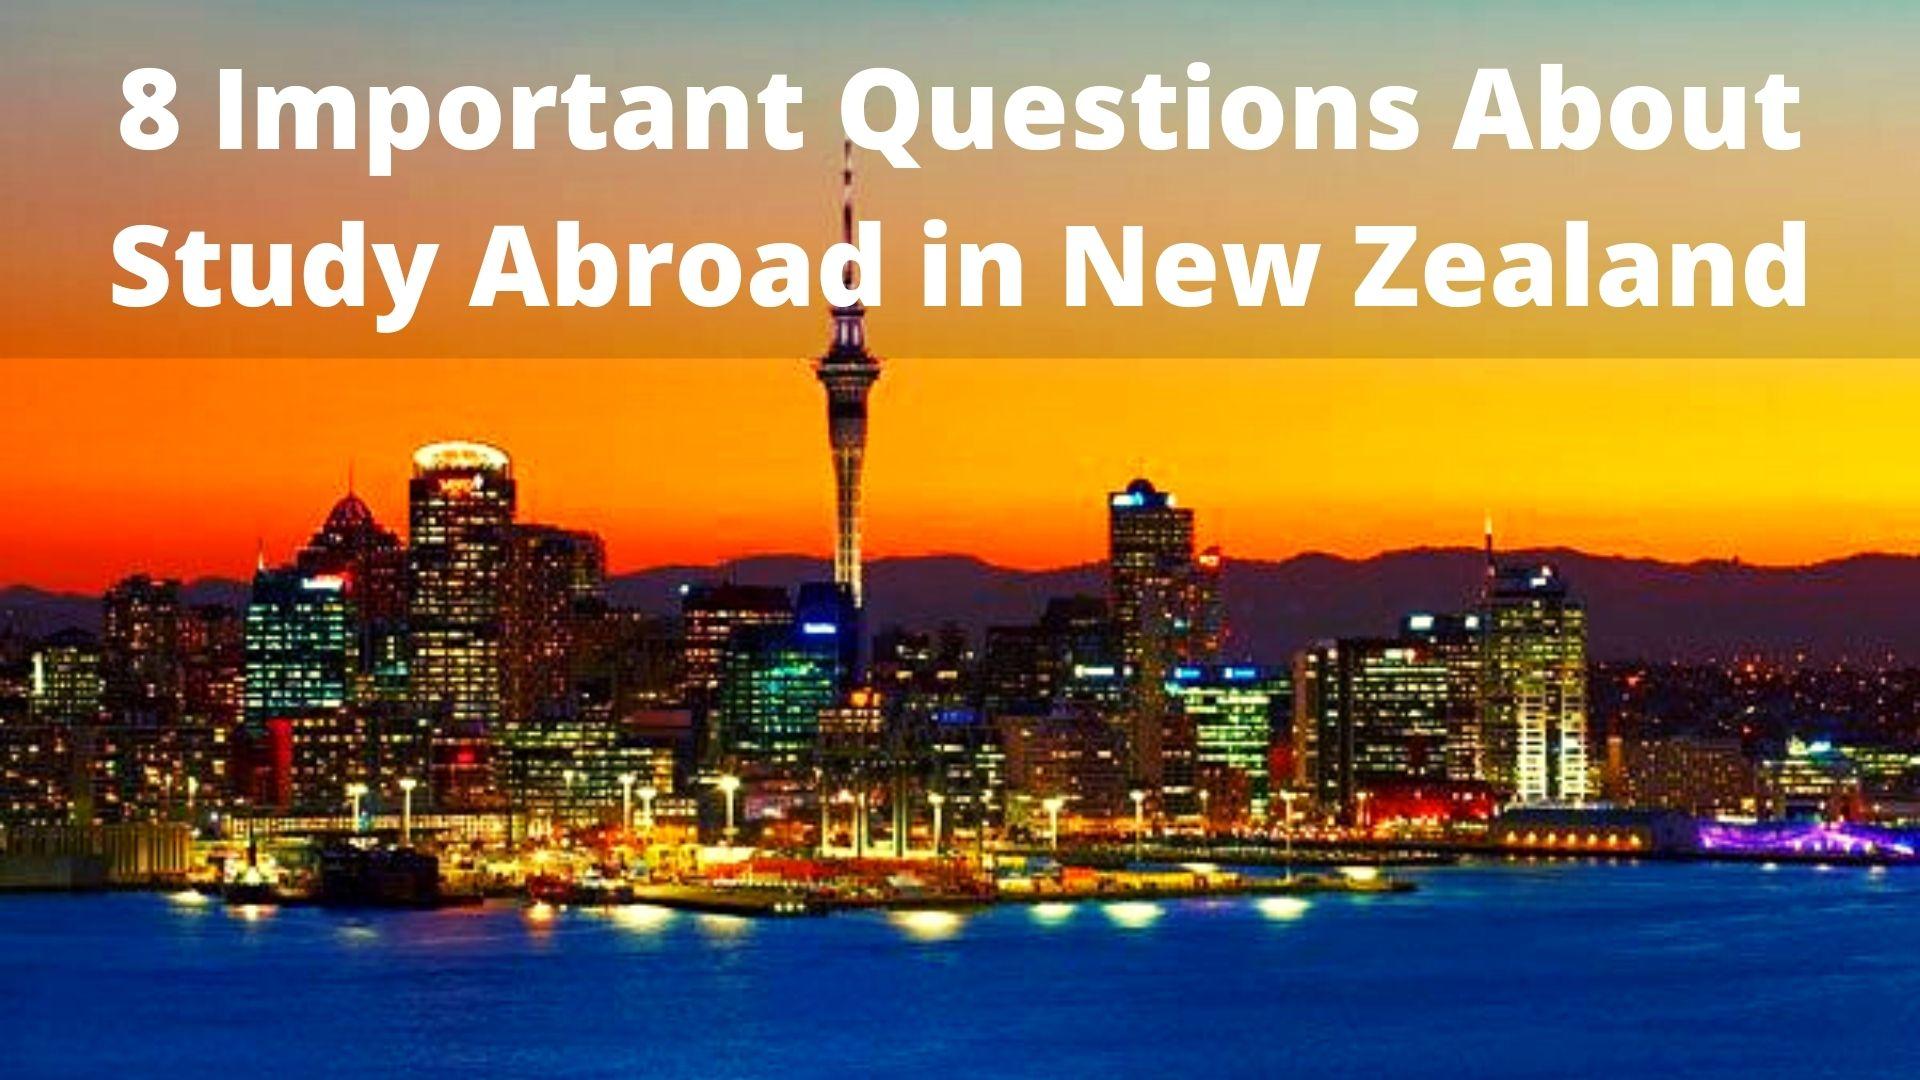 8 Important Questions About Study Abroad in New Zealand